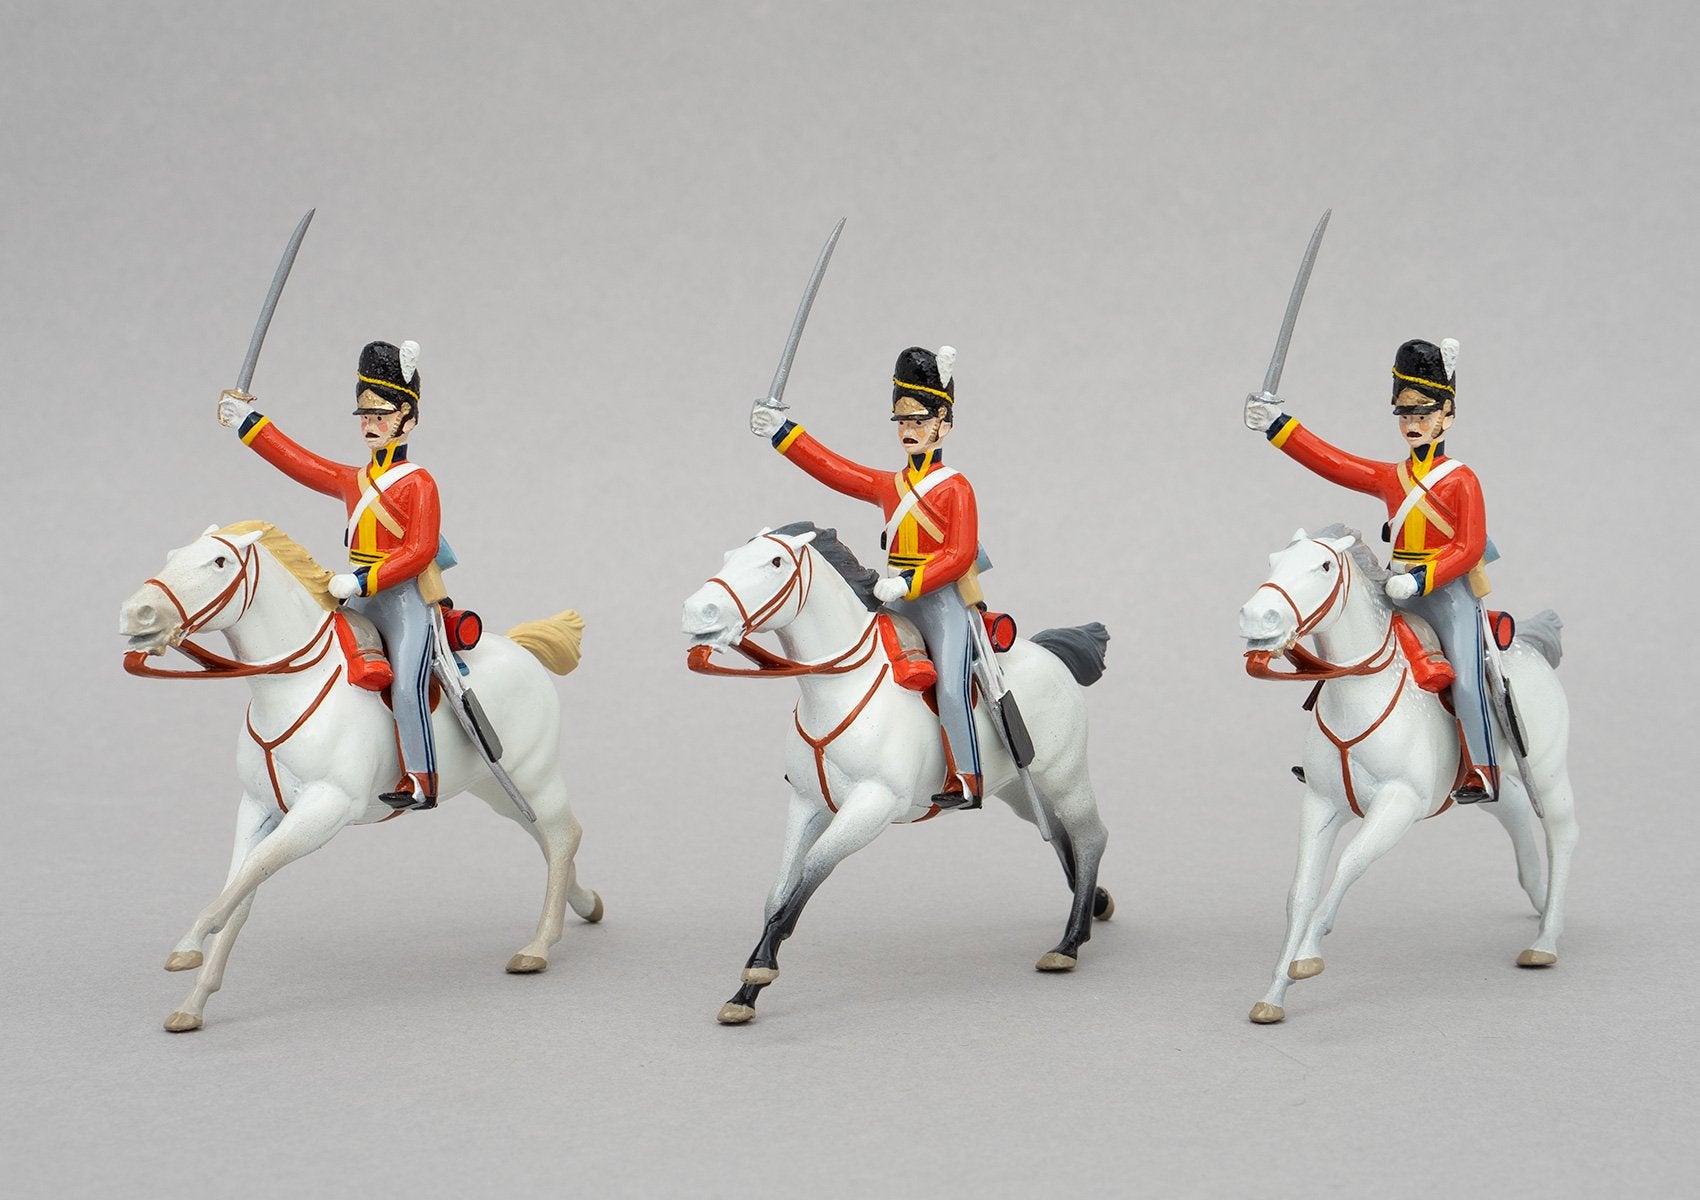 Set 152 Scots Greys, Waterloo 1815 | British Cavalry | Napoleonic Wars | Three mounted Heavy Dragoons with tall bearskin hats, grey mounts, sabres and carbines | Waterloo | © Imperial Productions | Sculpt by David Cowe